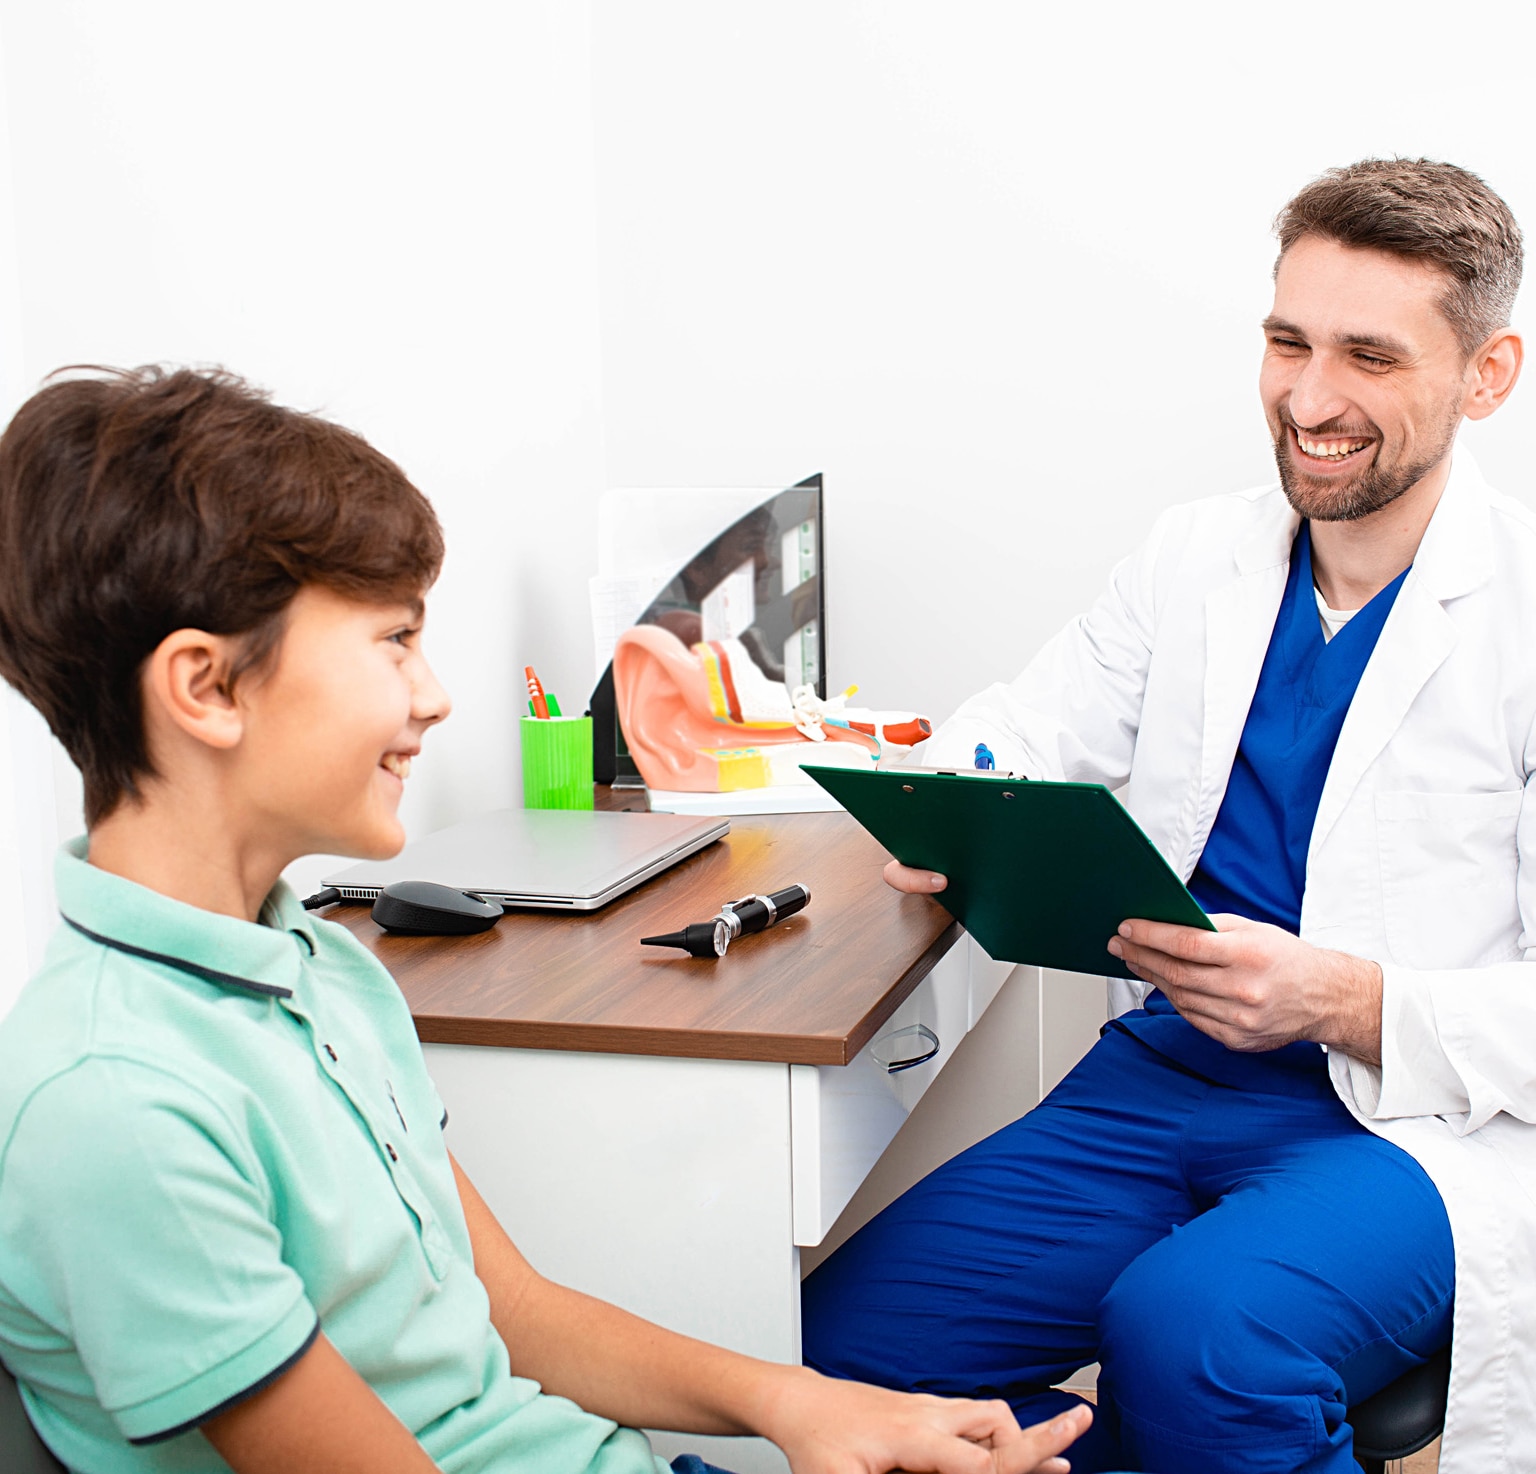 boy visits a doctor audiologist. Hearing test. Audiologist's office; Shutterstock ID 1625923840; purchase_order: -; job: -; client: -; other: -